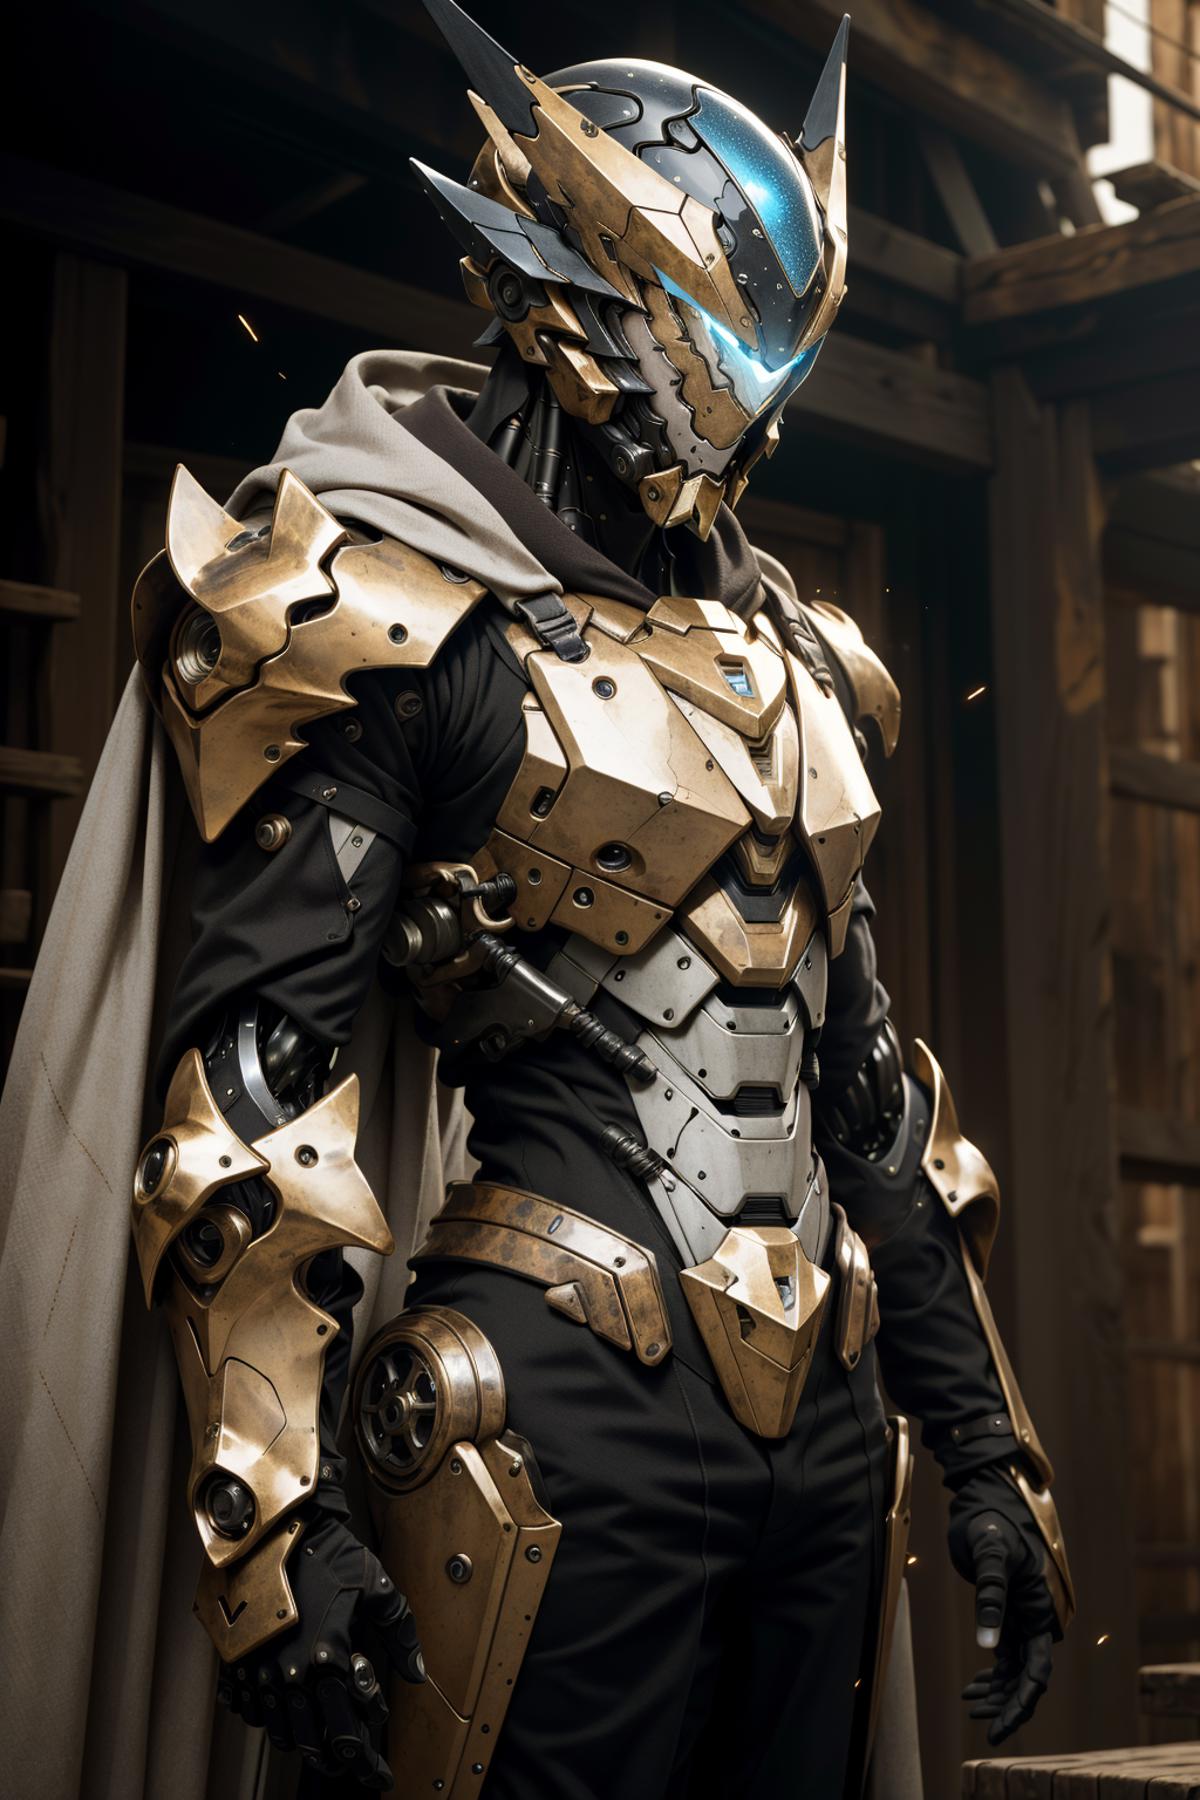 A robotic figure with metallic armor and a cape stands in a room.